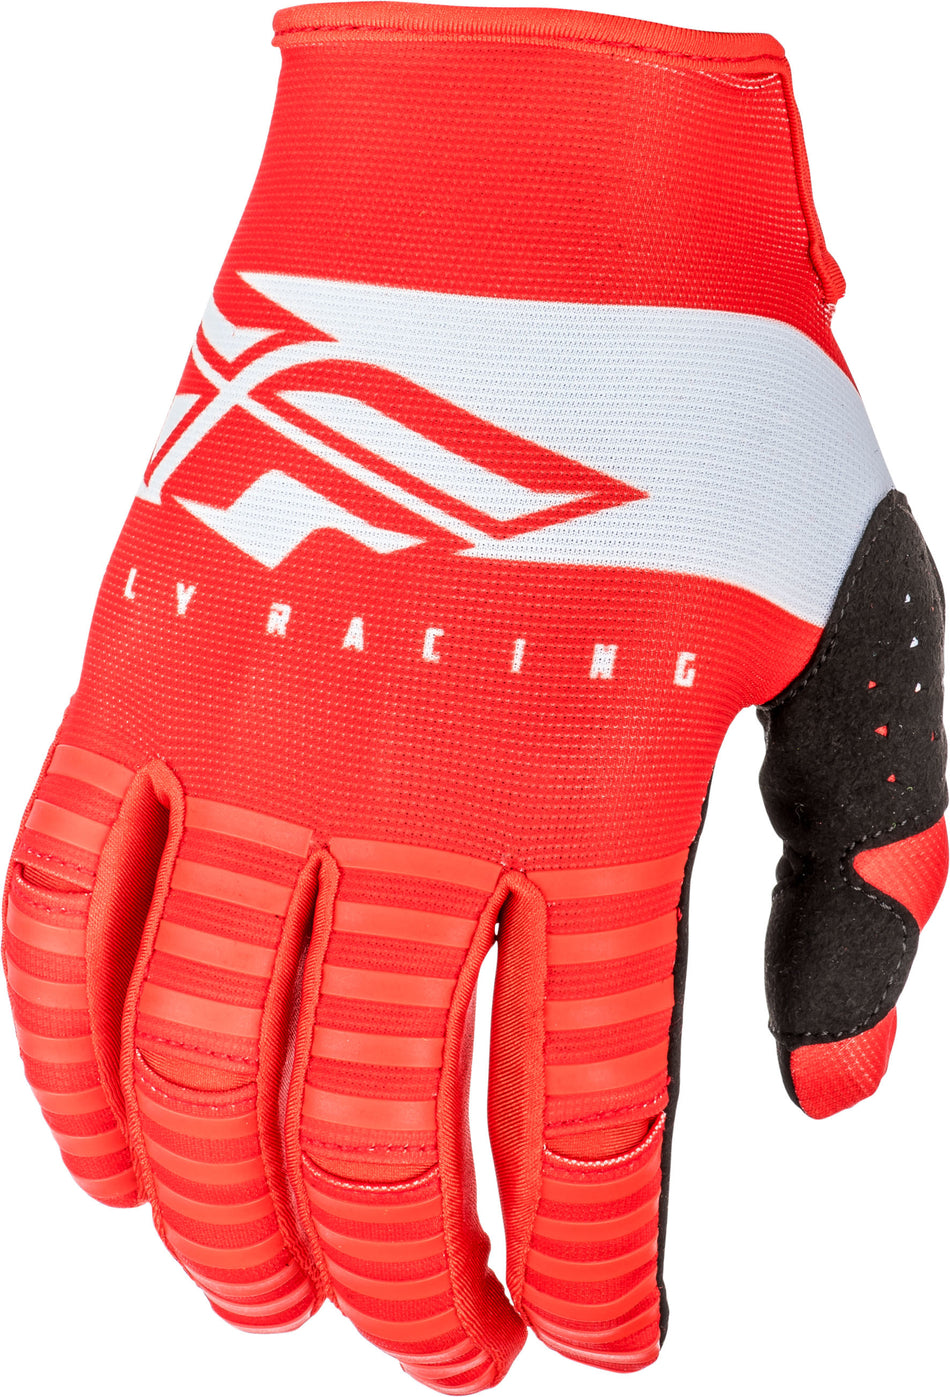 FLY RACING Kinetic Shield Gloves Red/White Sz 10 372-41210